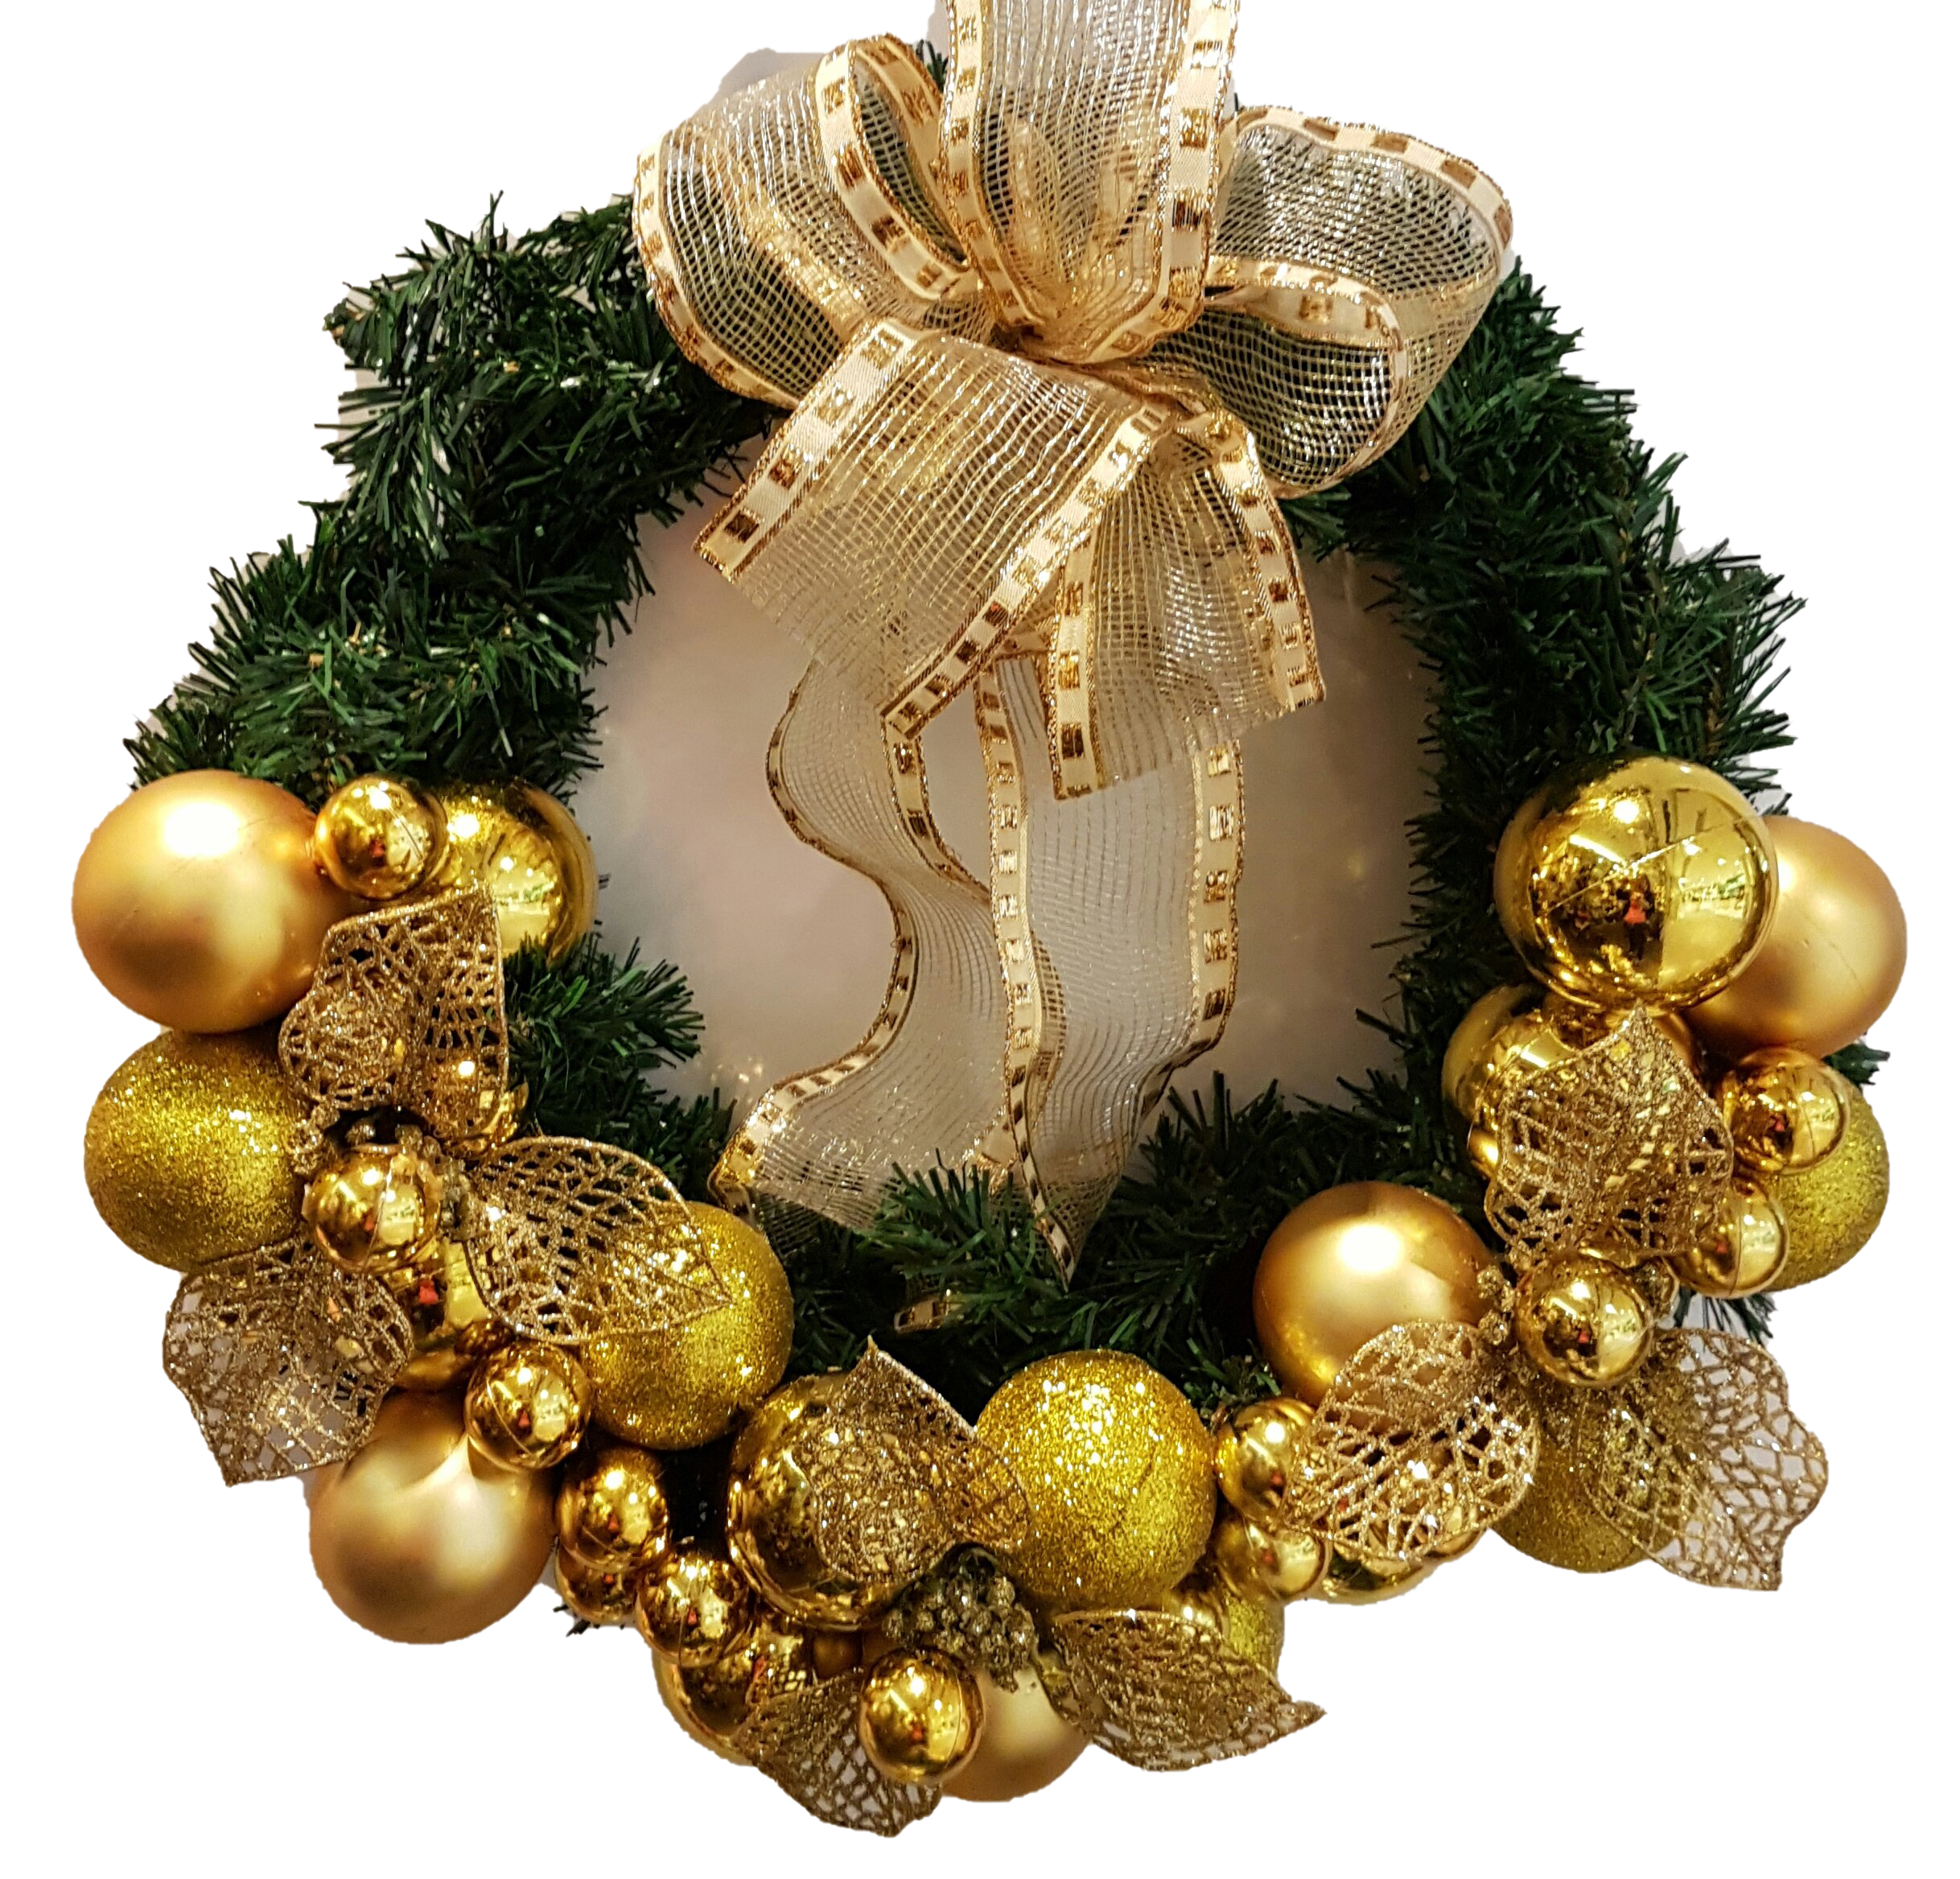 Download PNG image - Gold Christmas Wreath PNG Image 